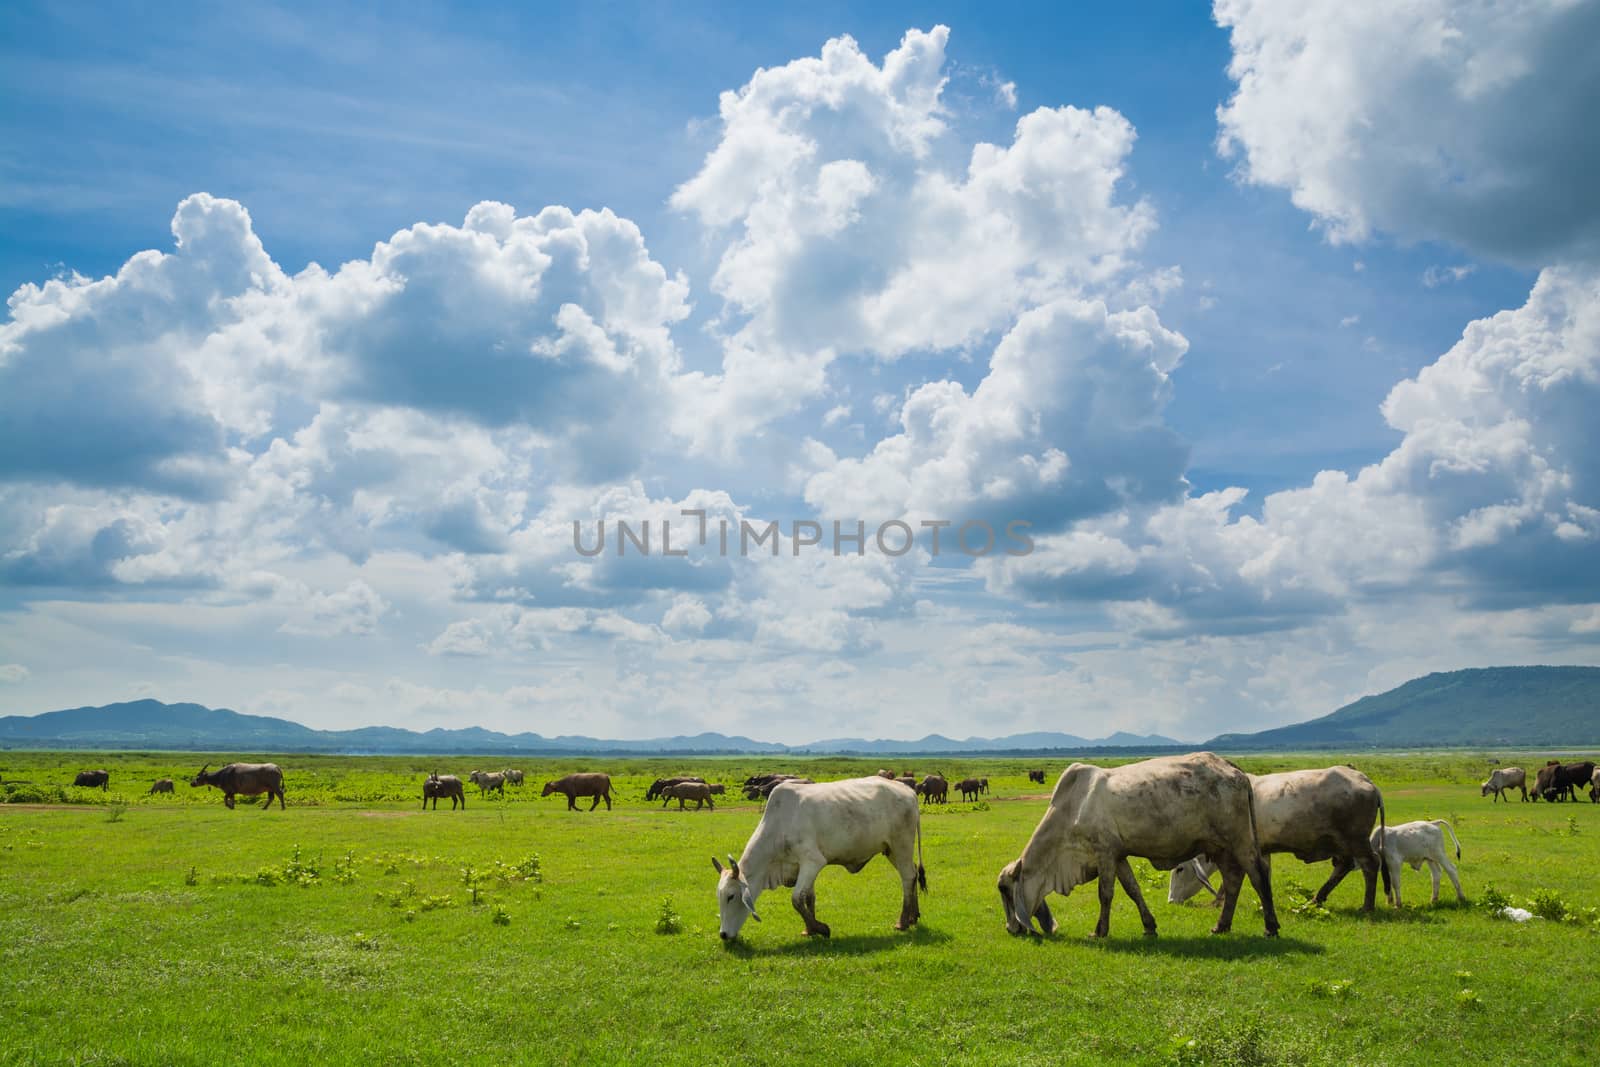 Group of Cow eating Grass in Green field under Sunny Cloud Sky